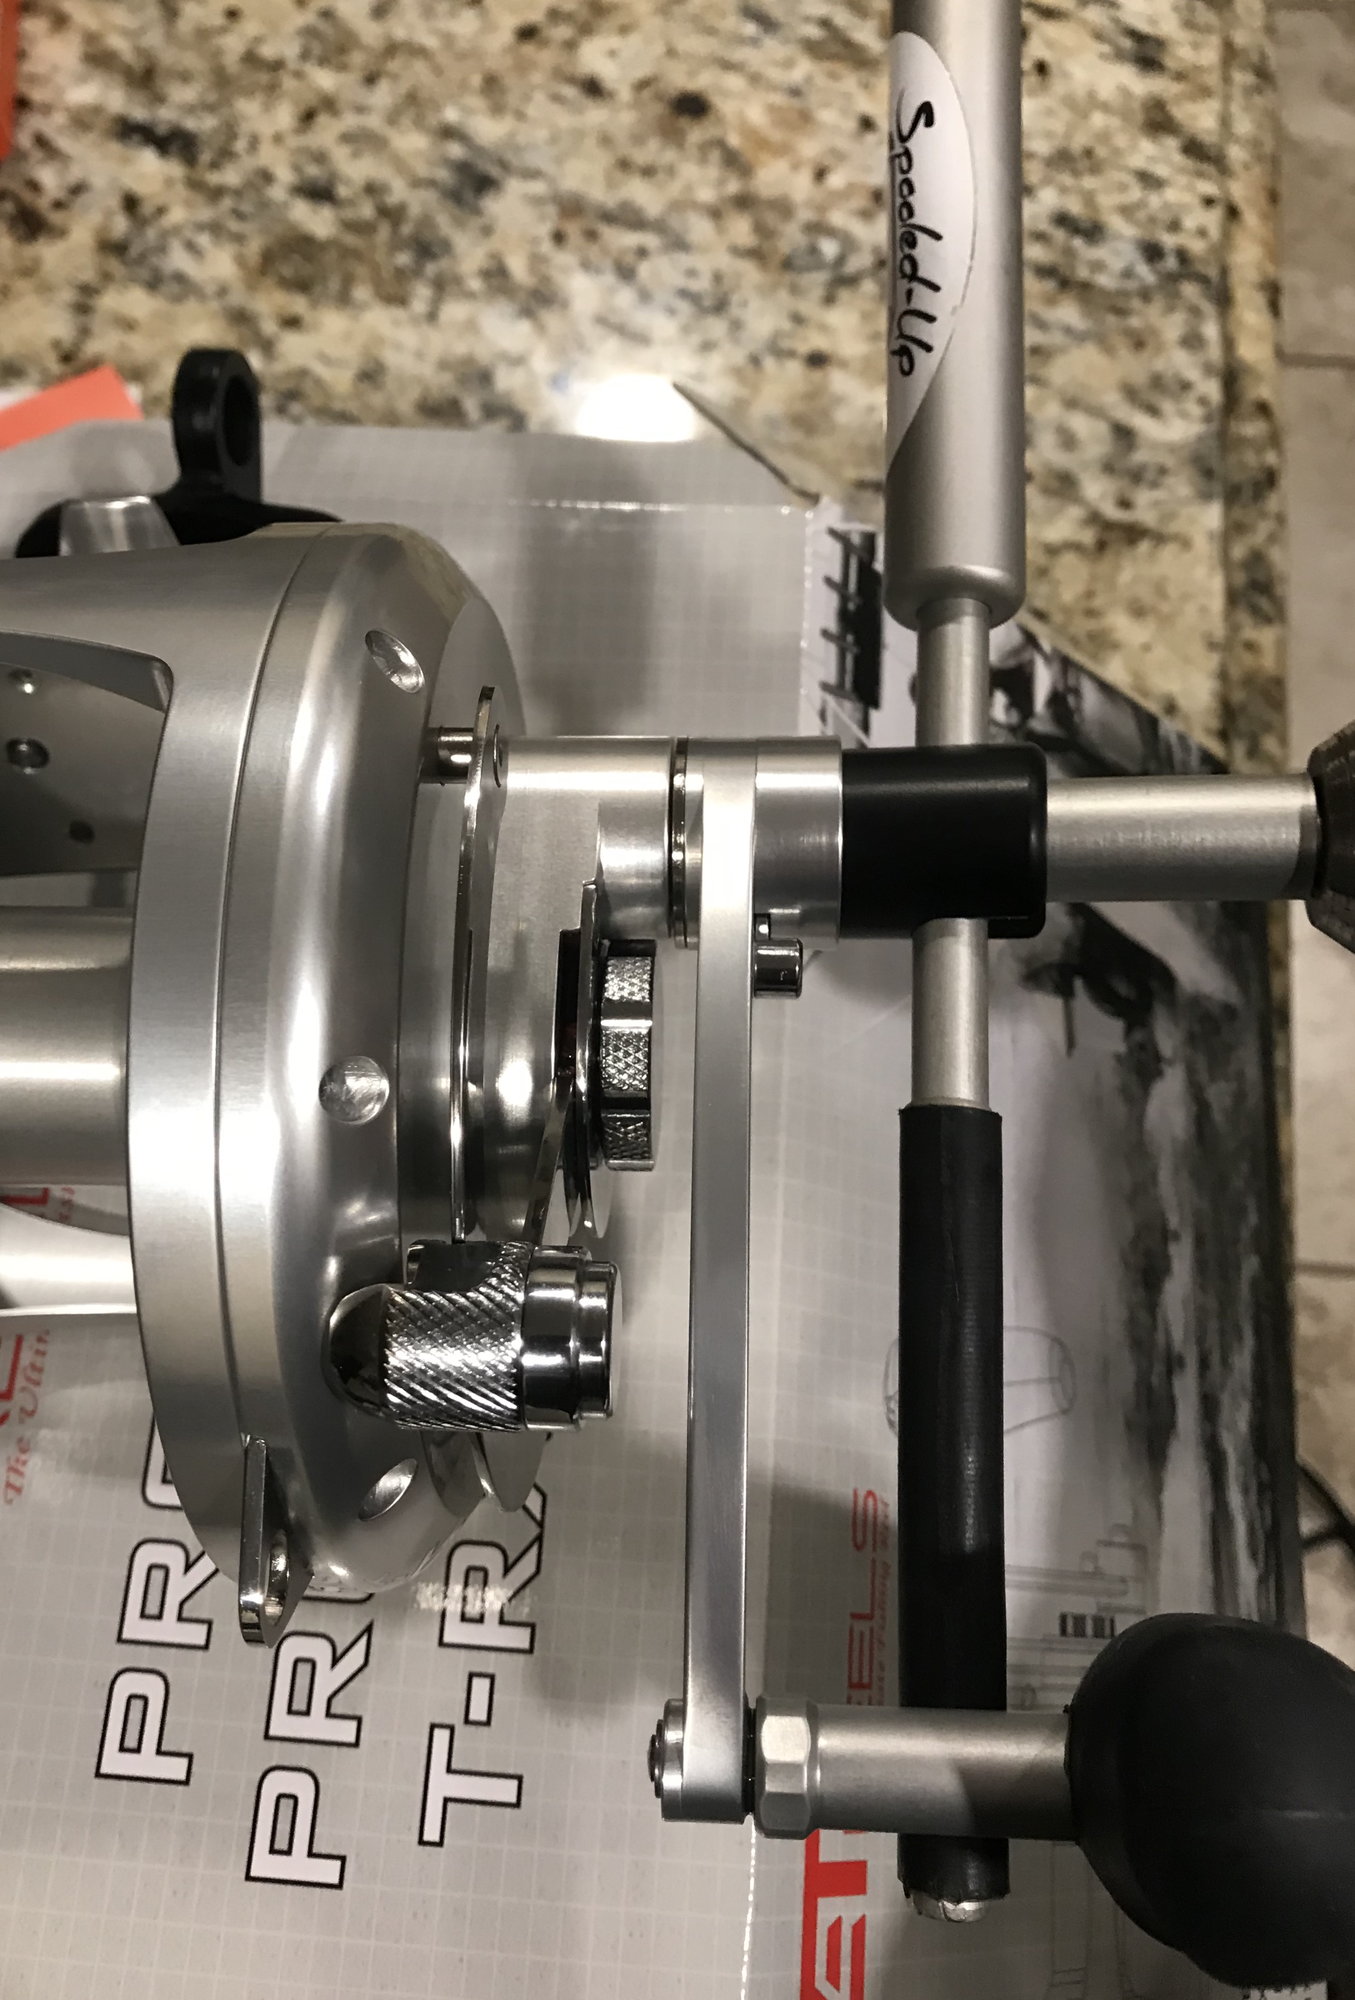 Hand crank sword reel options - The Hull Truth - Boating and Fishing Forum